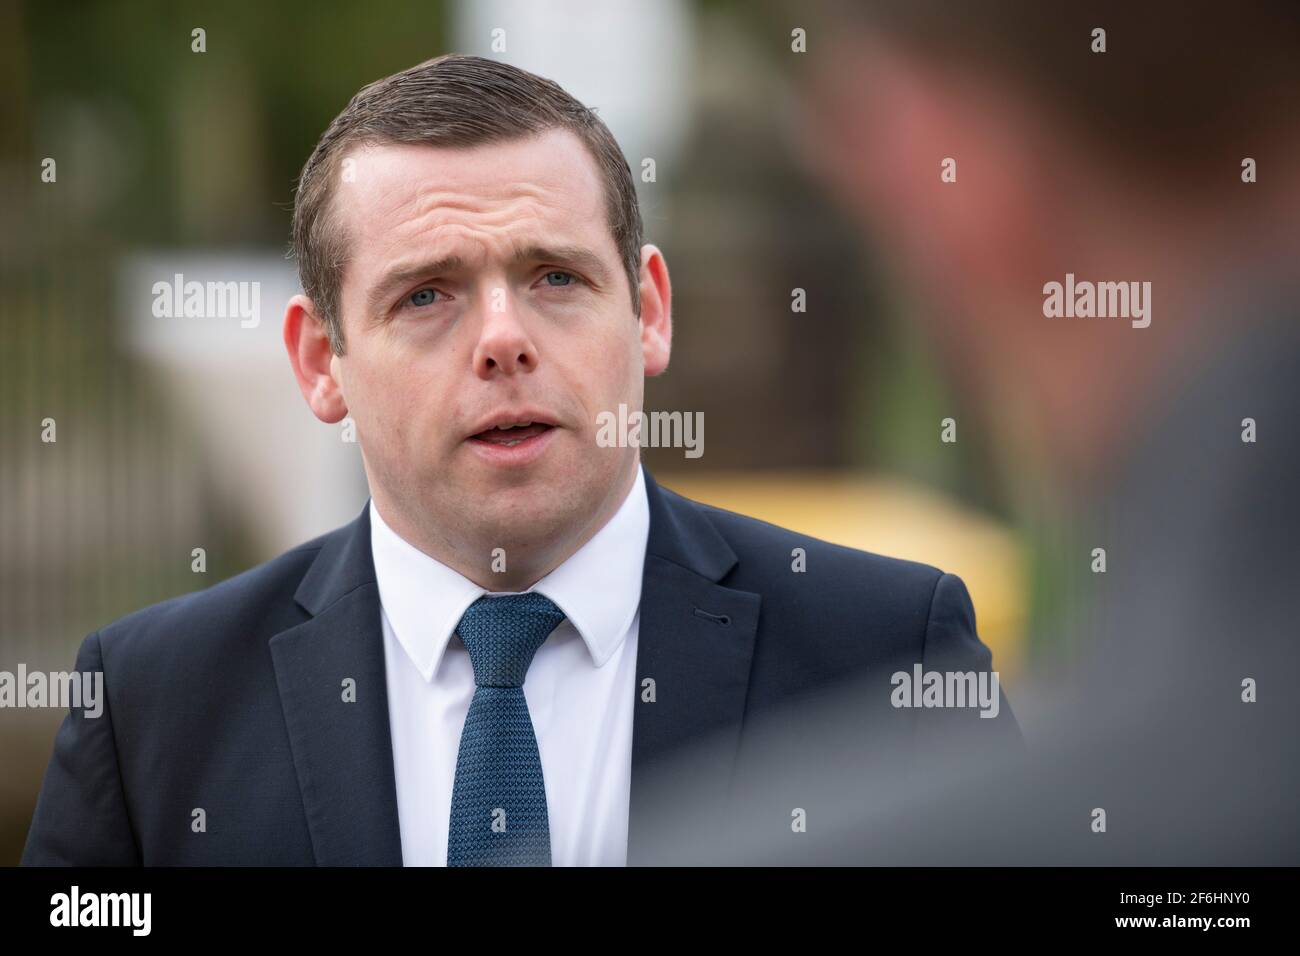 Glasgow, Scotland, UK. 1st Apr, 2021. PICTURED: Douglas Ross MP. Douglas Ross will meets candidate and GP Sandesh Gulhane to unveil a banner on the vaccine rollout and announce the party's NHS spending pledges. Pic Credit: Colin Fisher/Alamy Live News Stock Photo